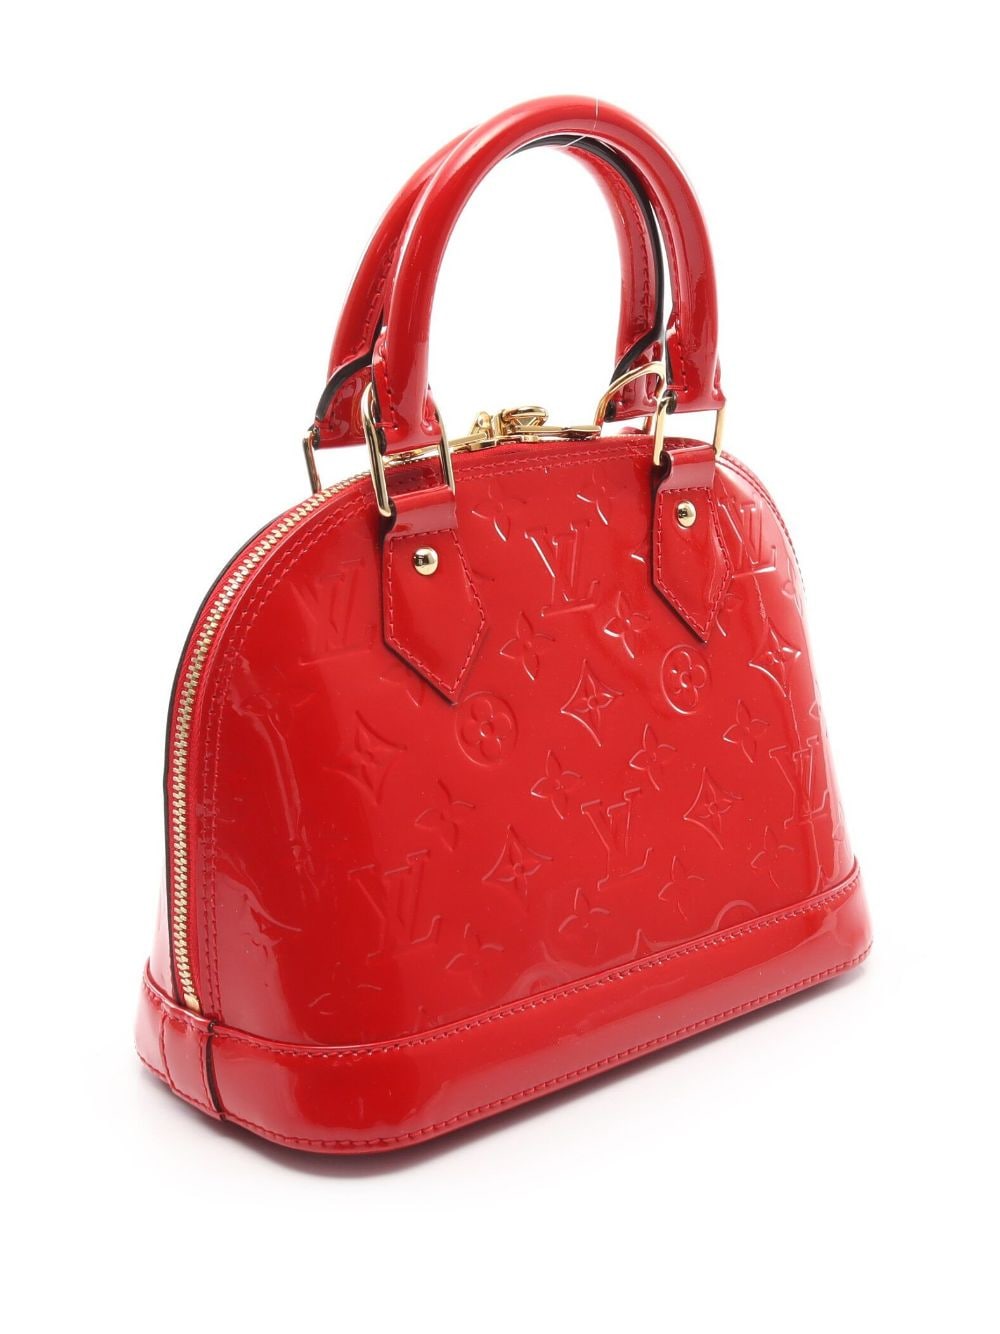 Louis Vuitton mini Alma bag in two-tone patent leather with